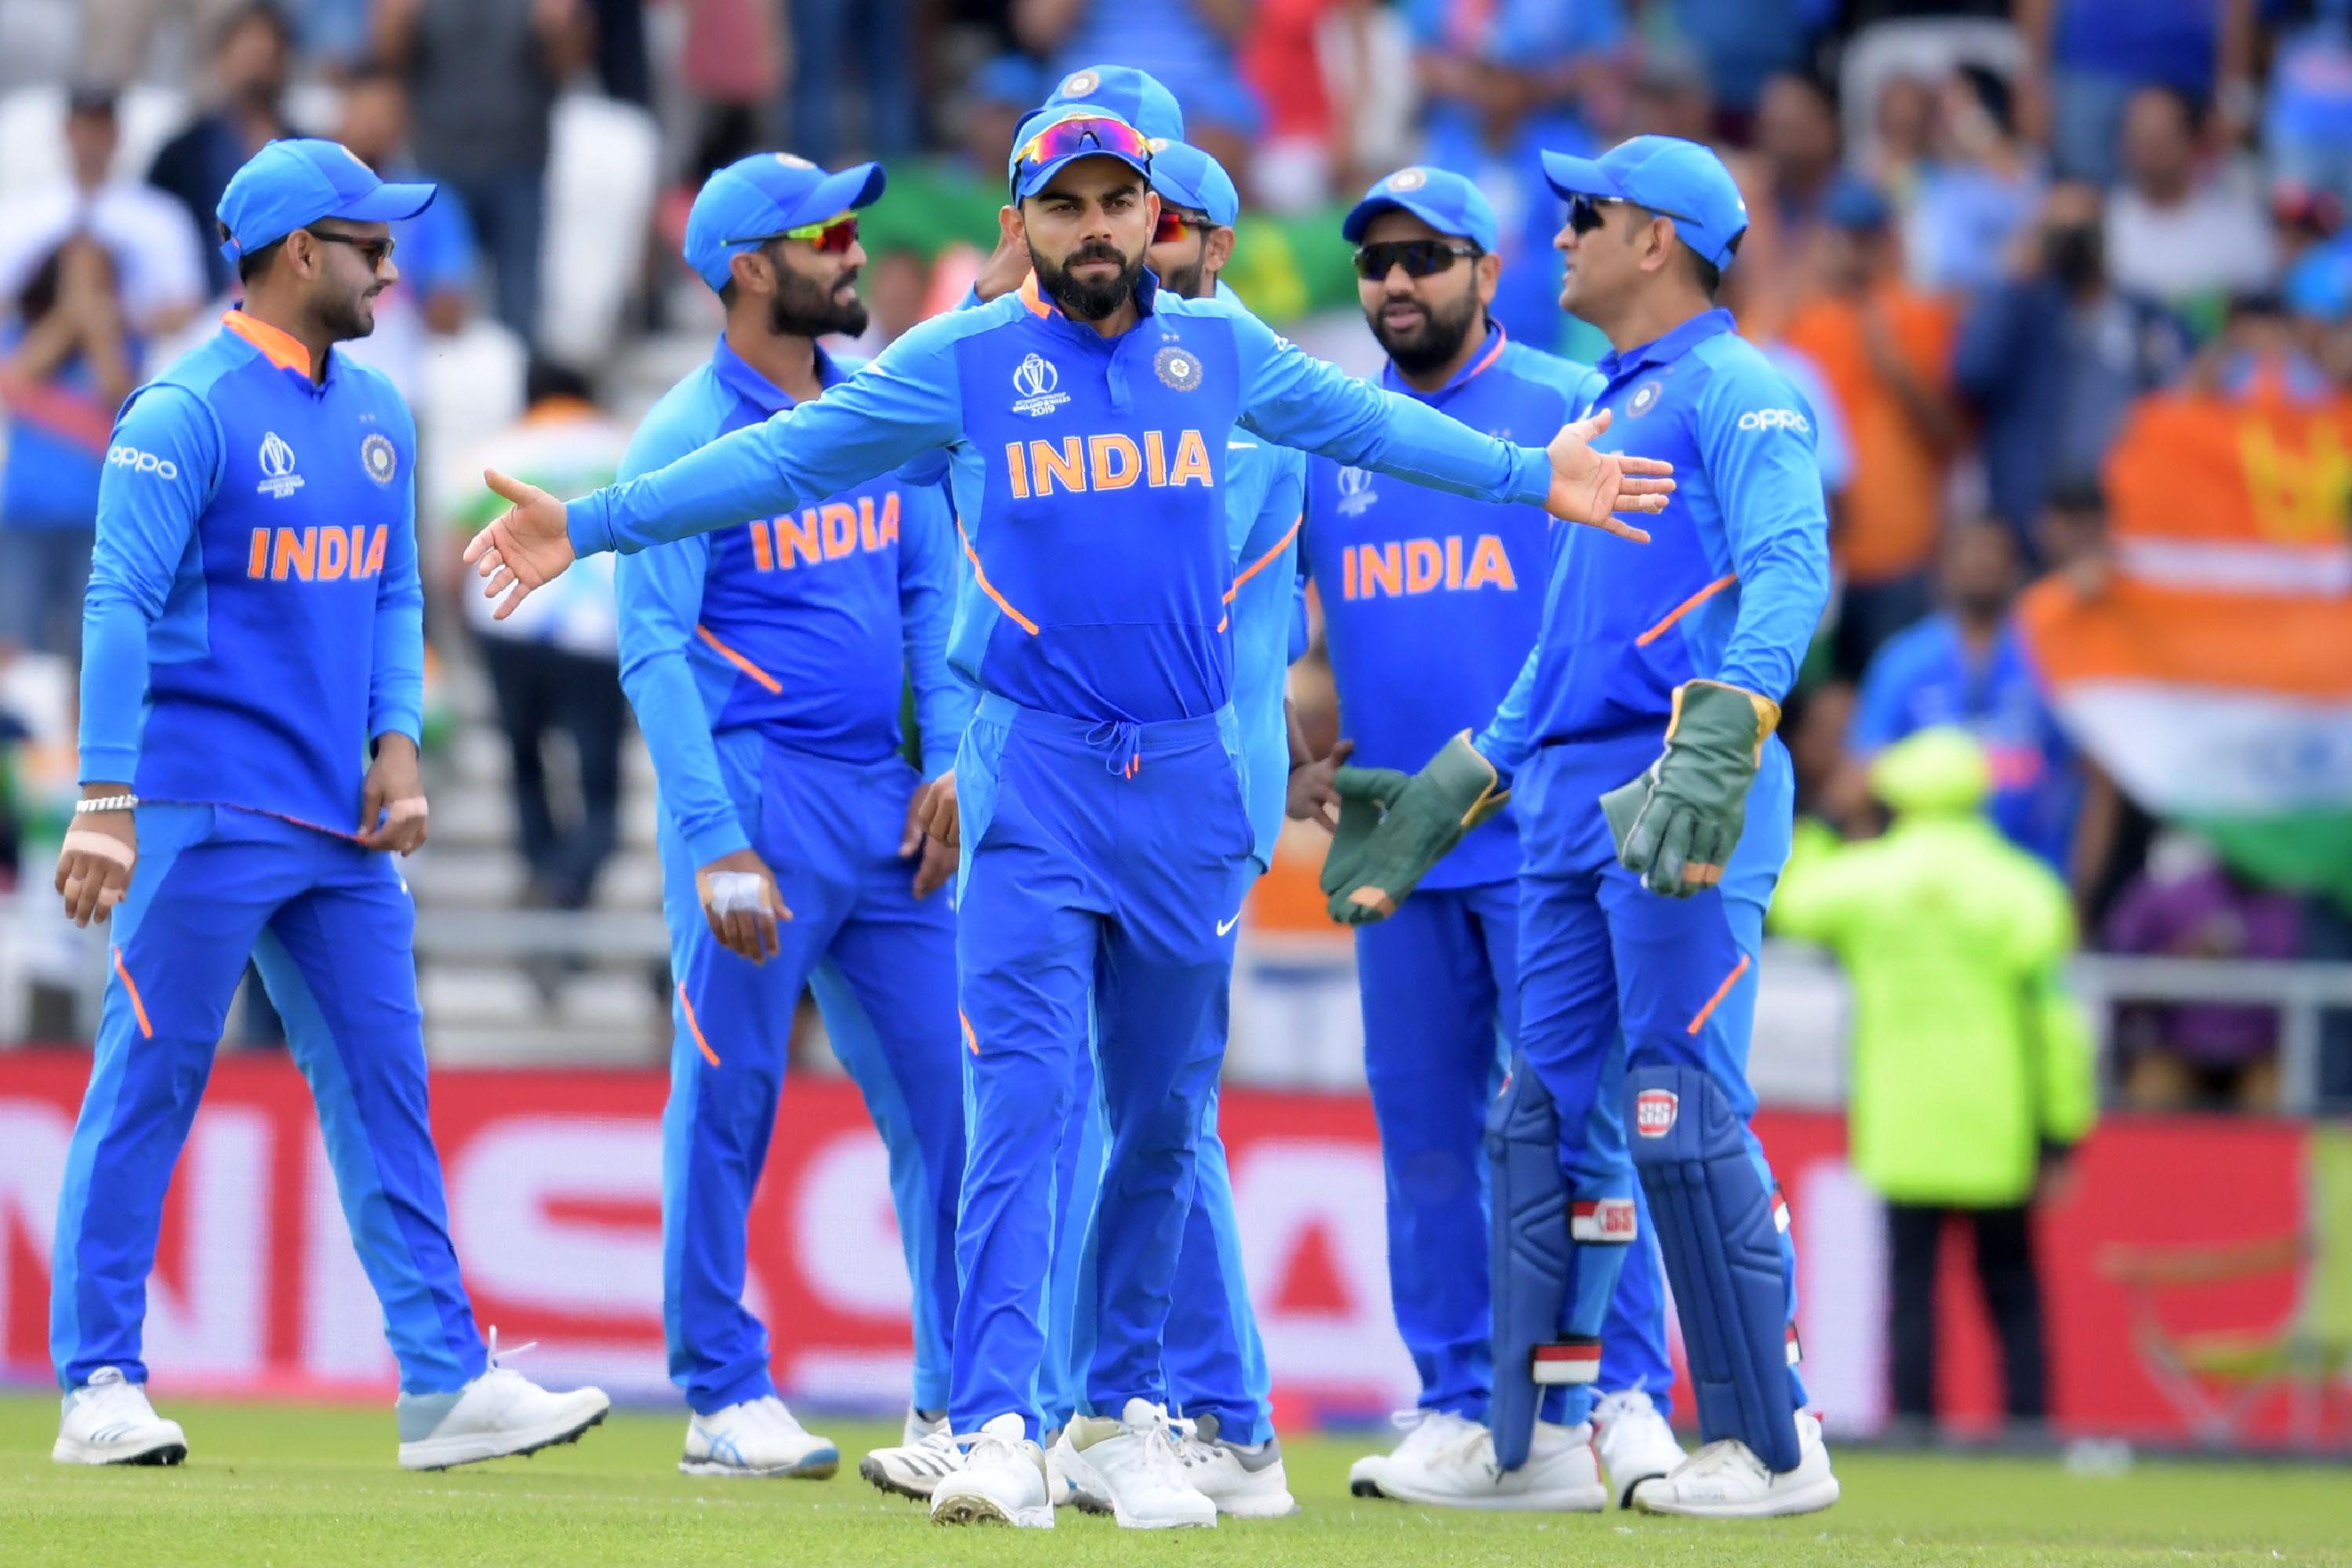 India vs Sri Lanka Live Cricket Score, World Cup 2019 In Pictures IND